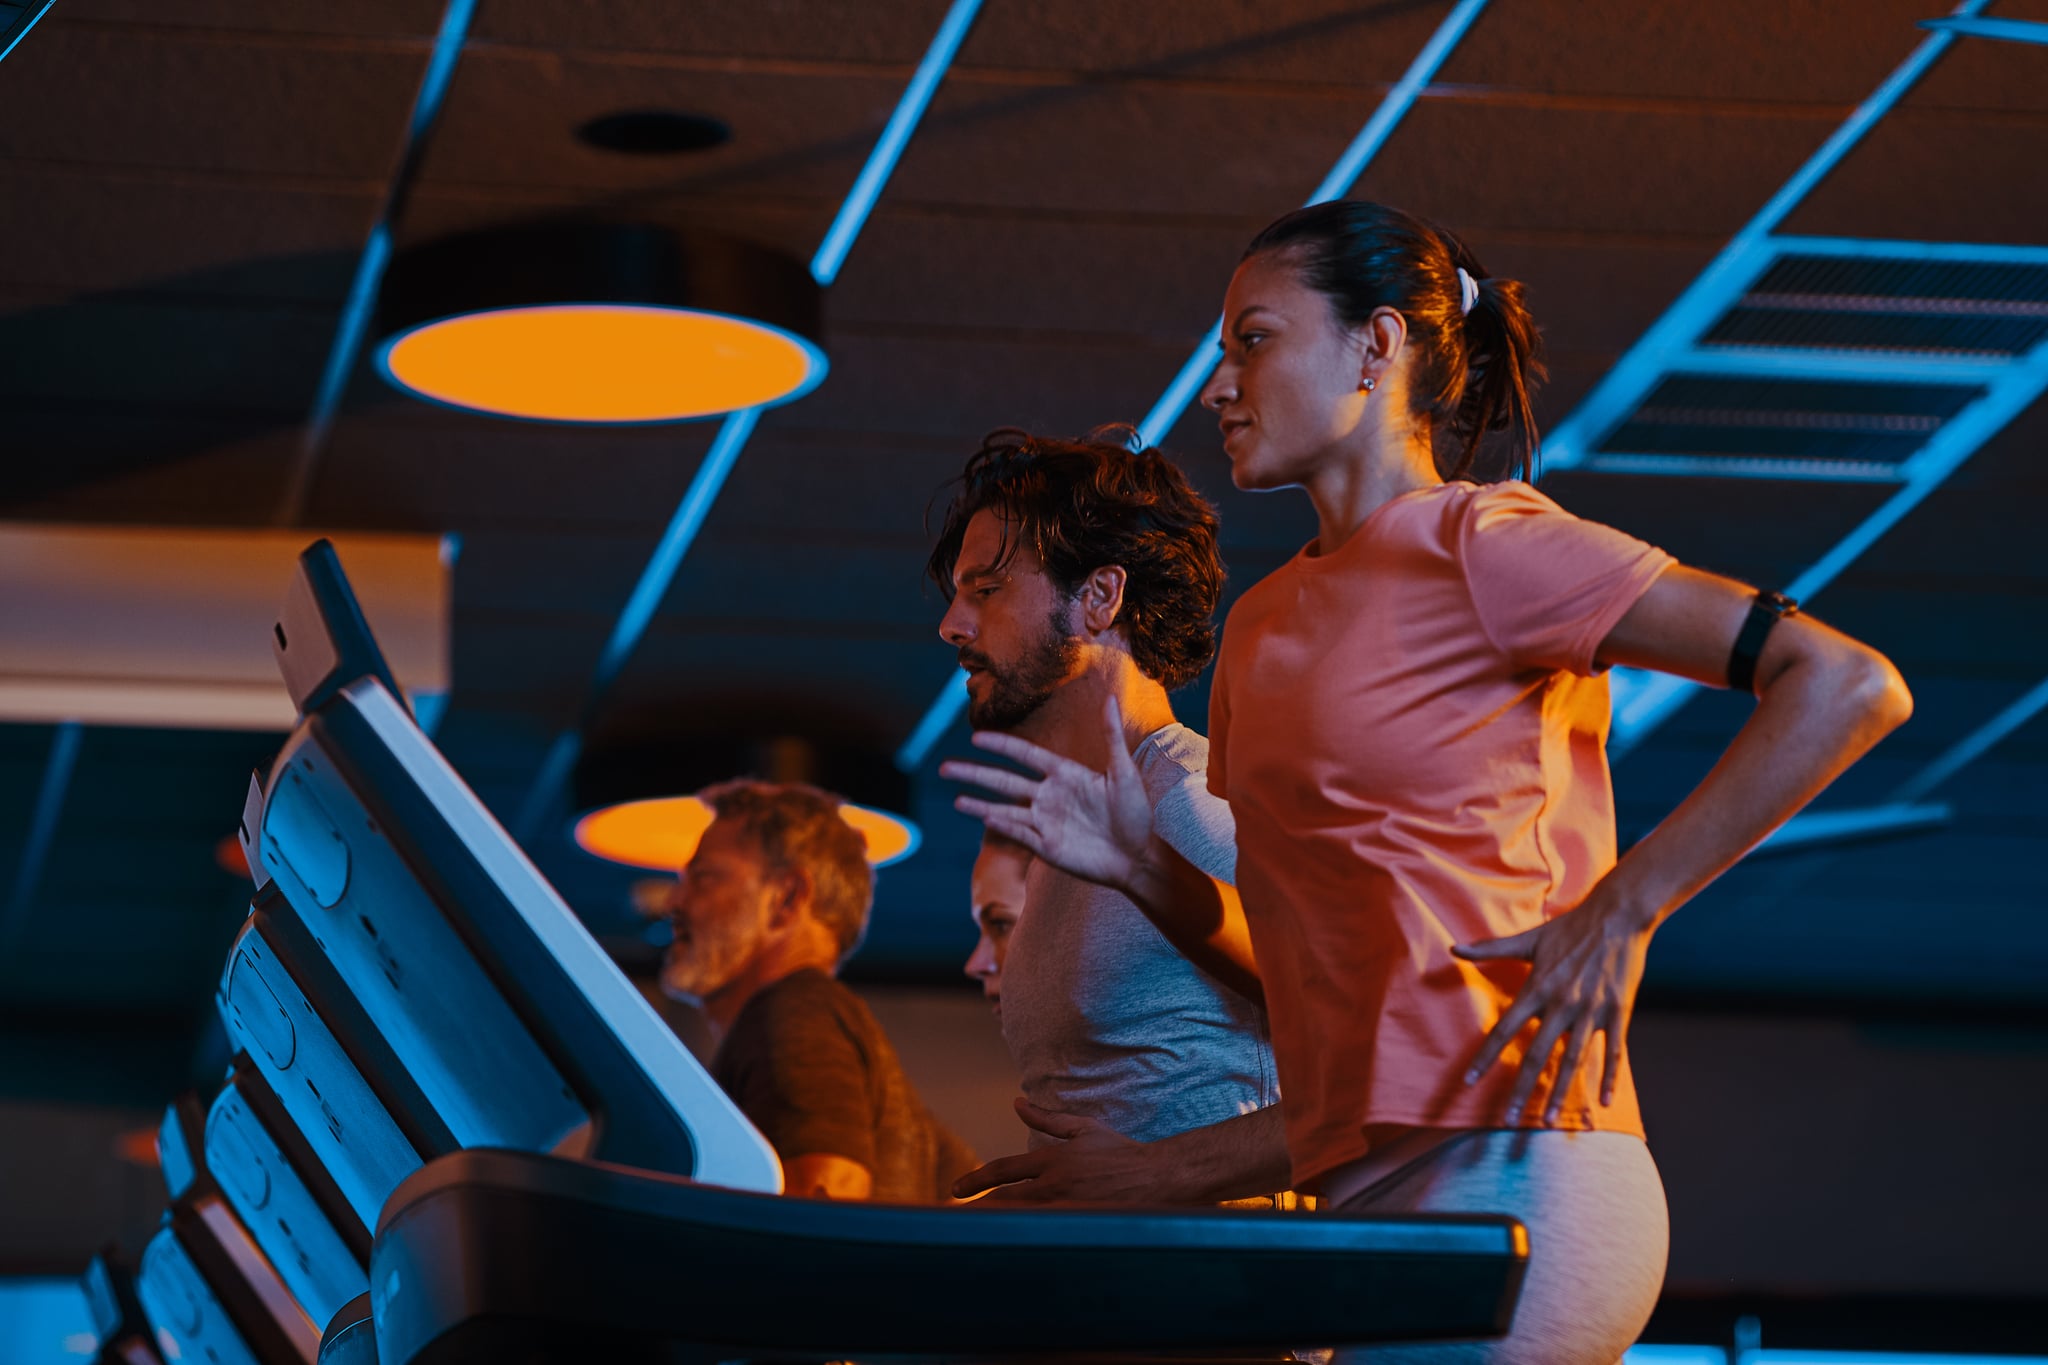 Splat! Orangetheory Fitness for Beginners: Journey of a Reluctant